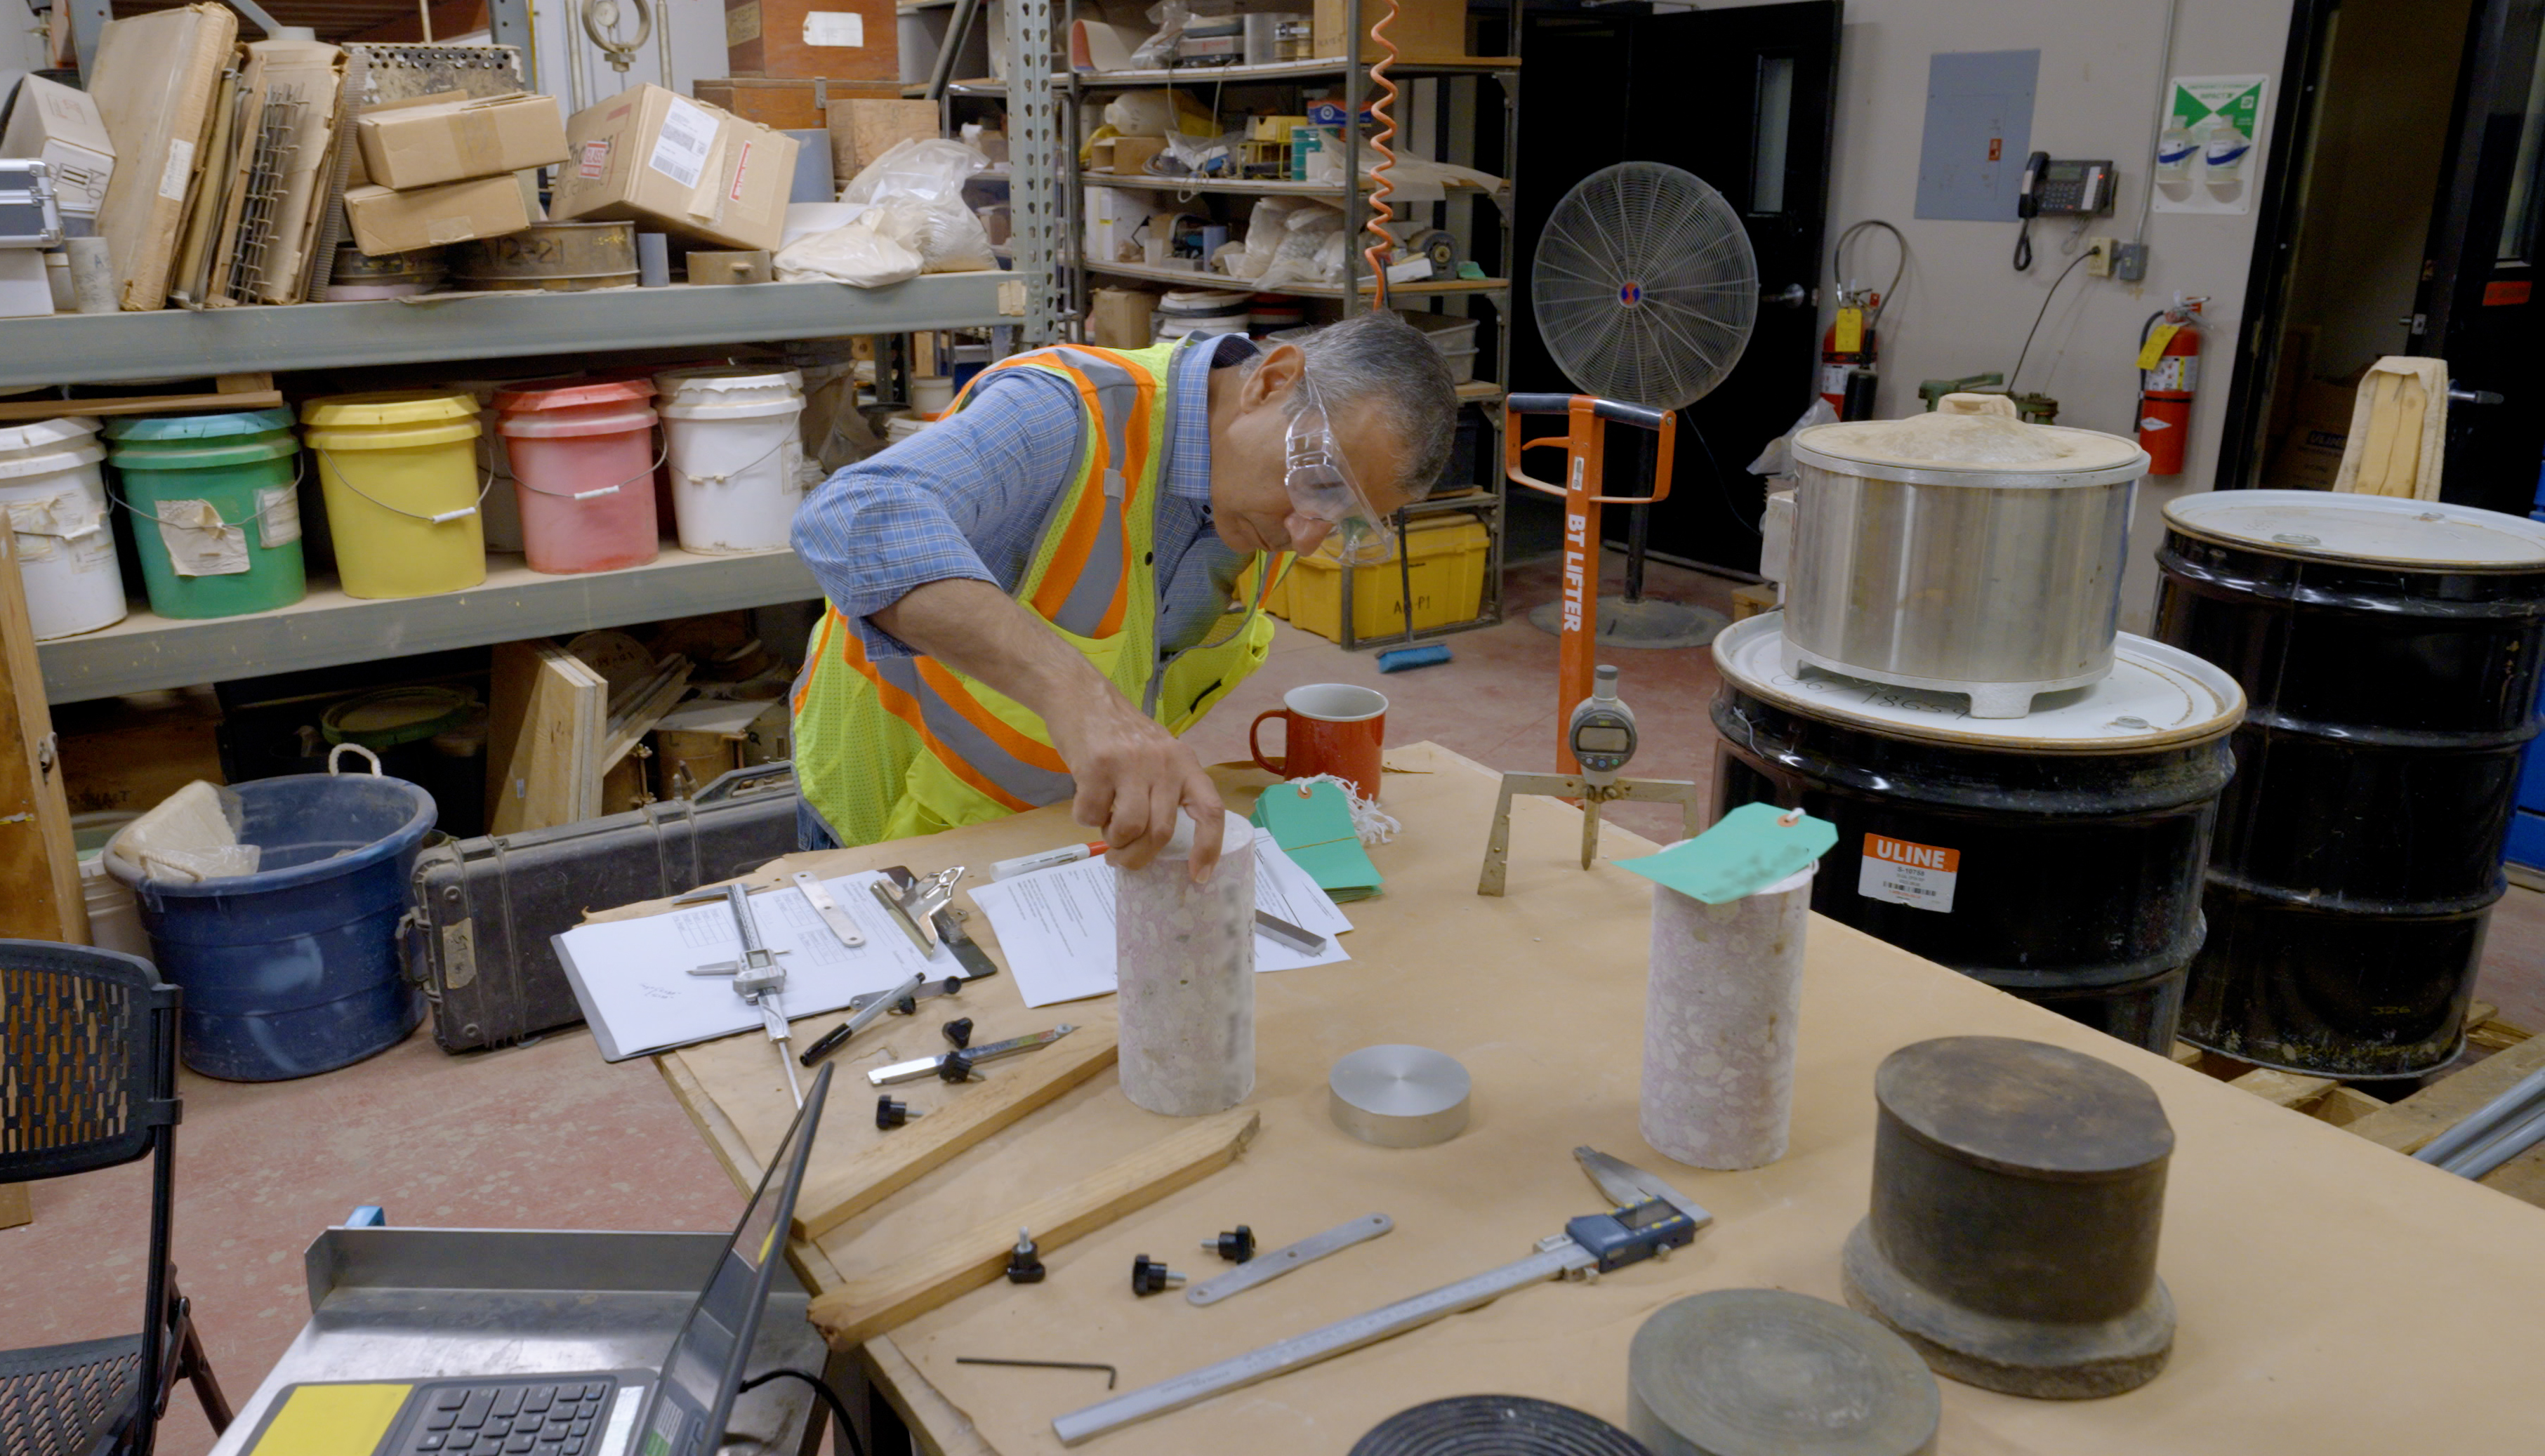 A researcher wearing safety goggles and a high-viz vest leans over to examine a concrete core sample on a lab table.